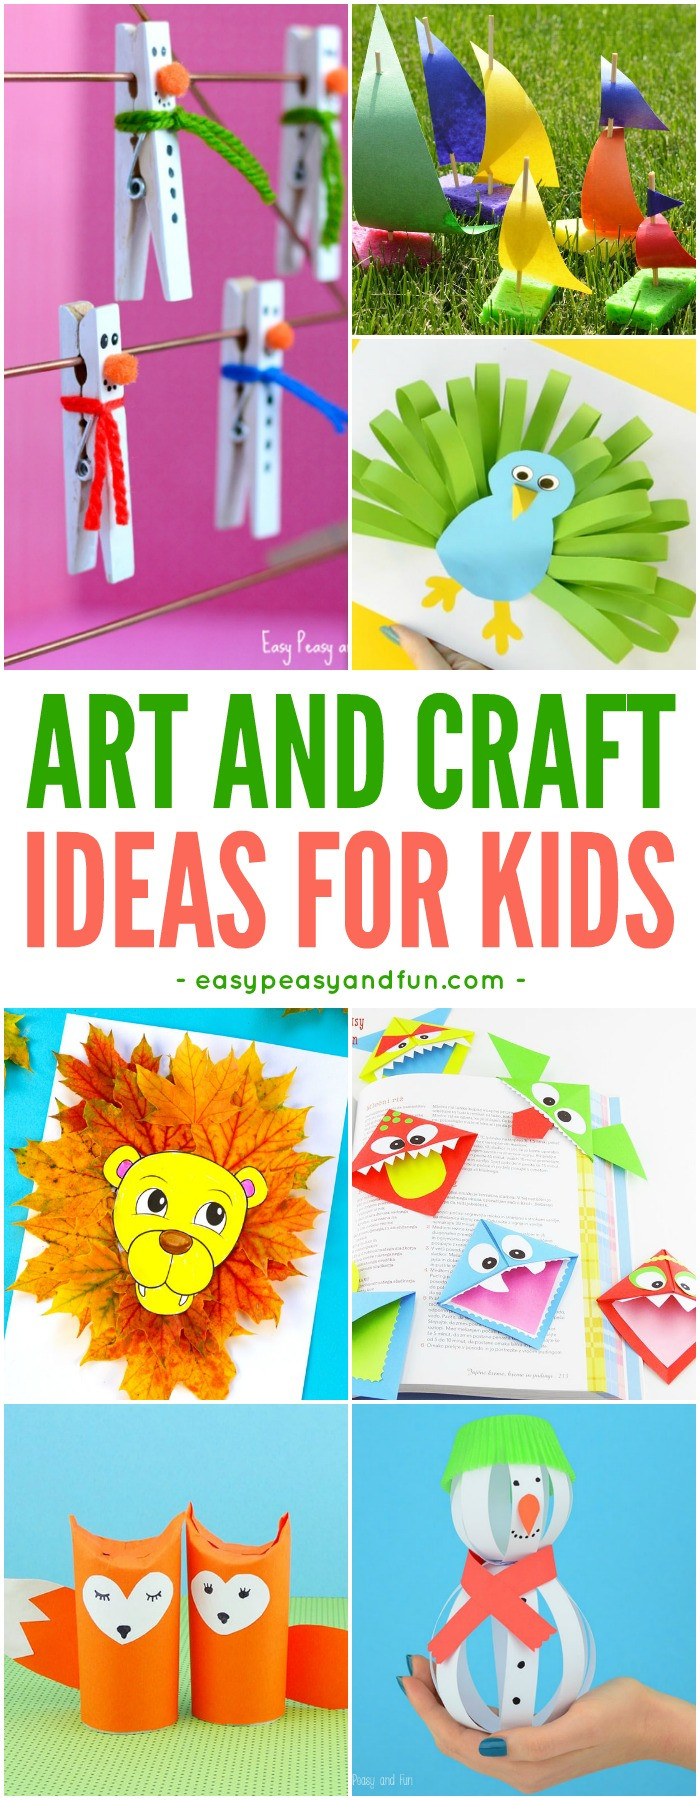 Toddler Arts And Craft Ideas
 Crafts For Kids Tons of Art and Craft Ideas for Kids to